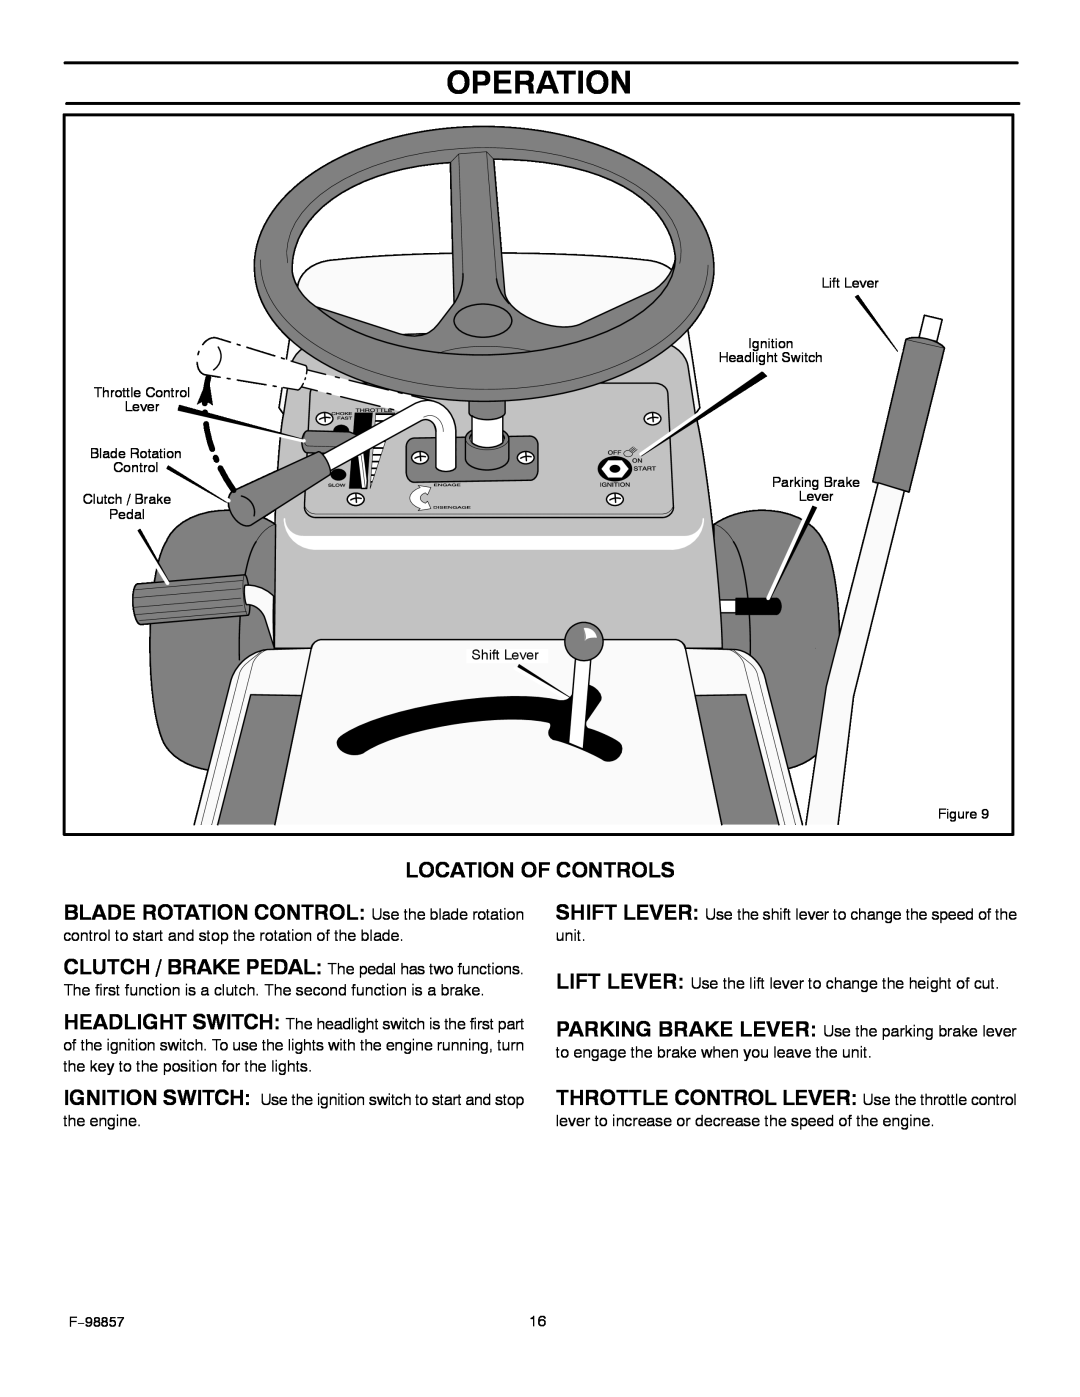 Hayter Mowers 30-Dec manual Operation, Location Of Controls, BLADE ROTATION CONTROL Use the blade rotation, Lift Lever 